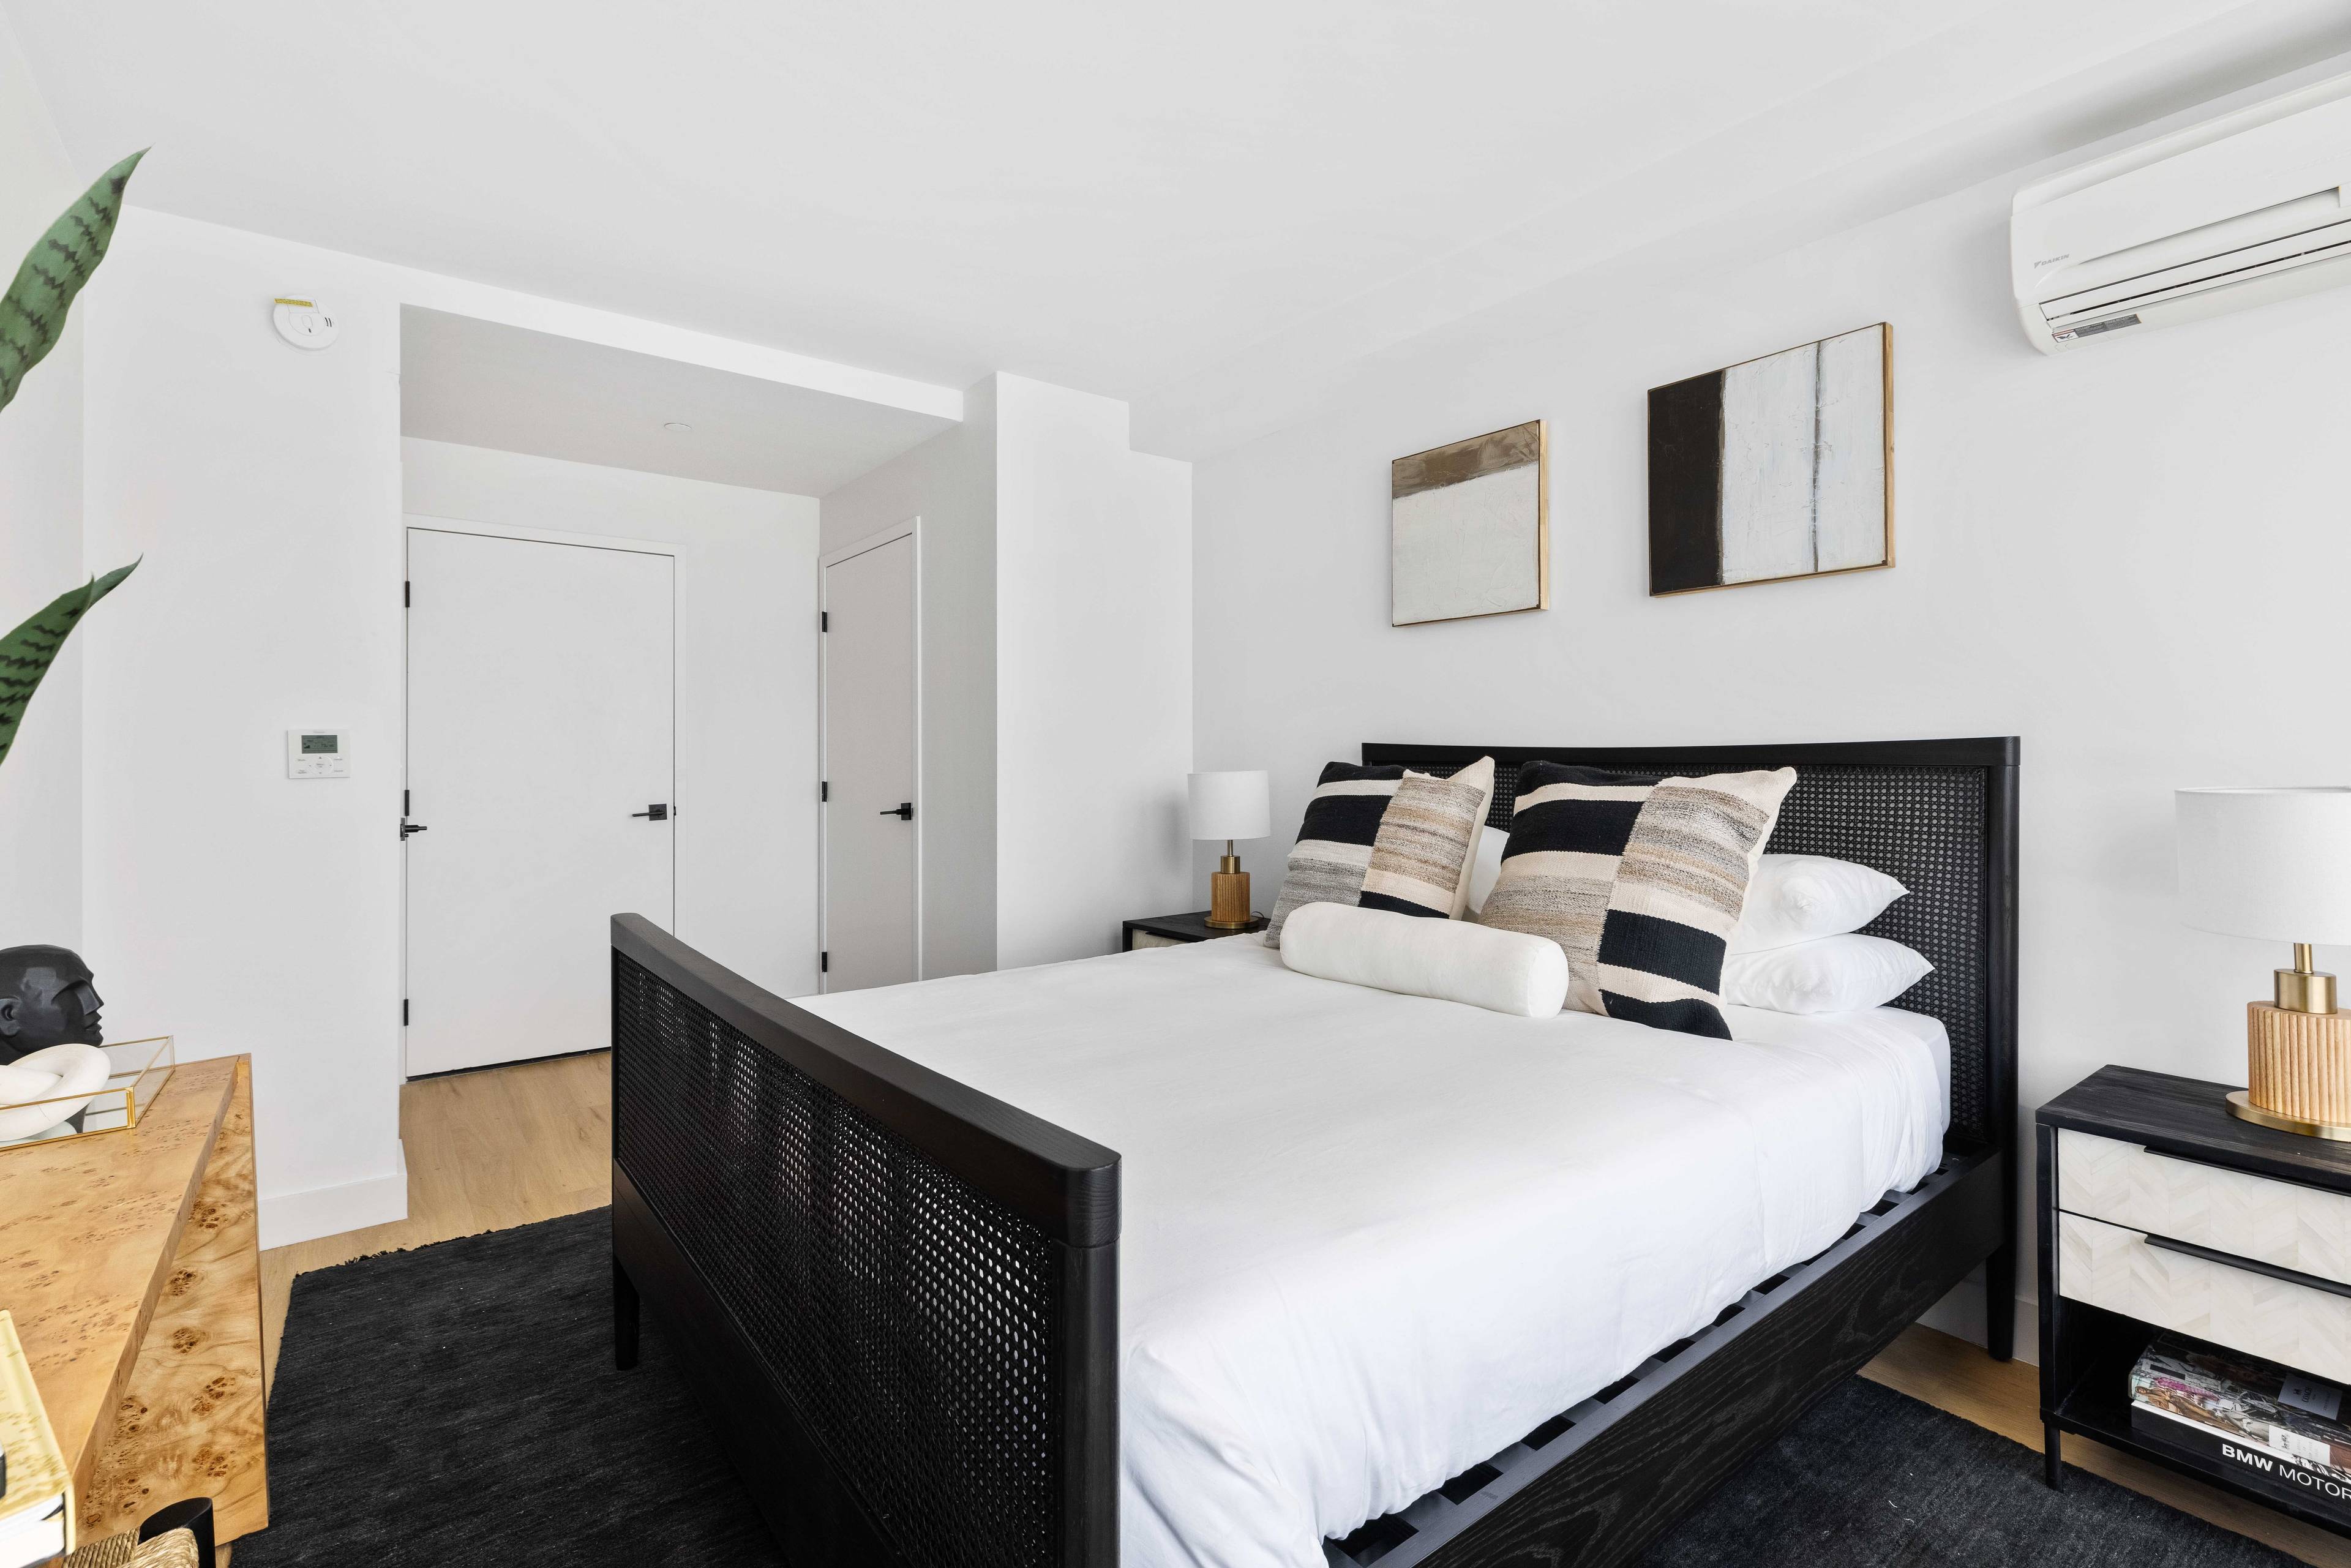 Beautiful studio, one bathroom apartment featuring a walk in closet, matte black and Calcutta finishes, custom tiled bathrooms, and in unit washer dryer.